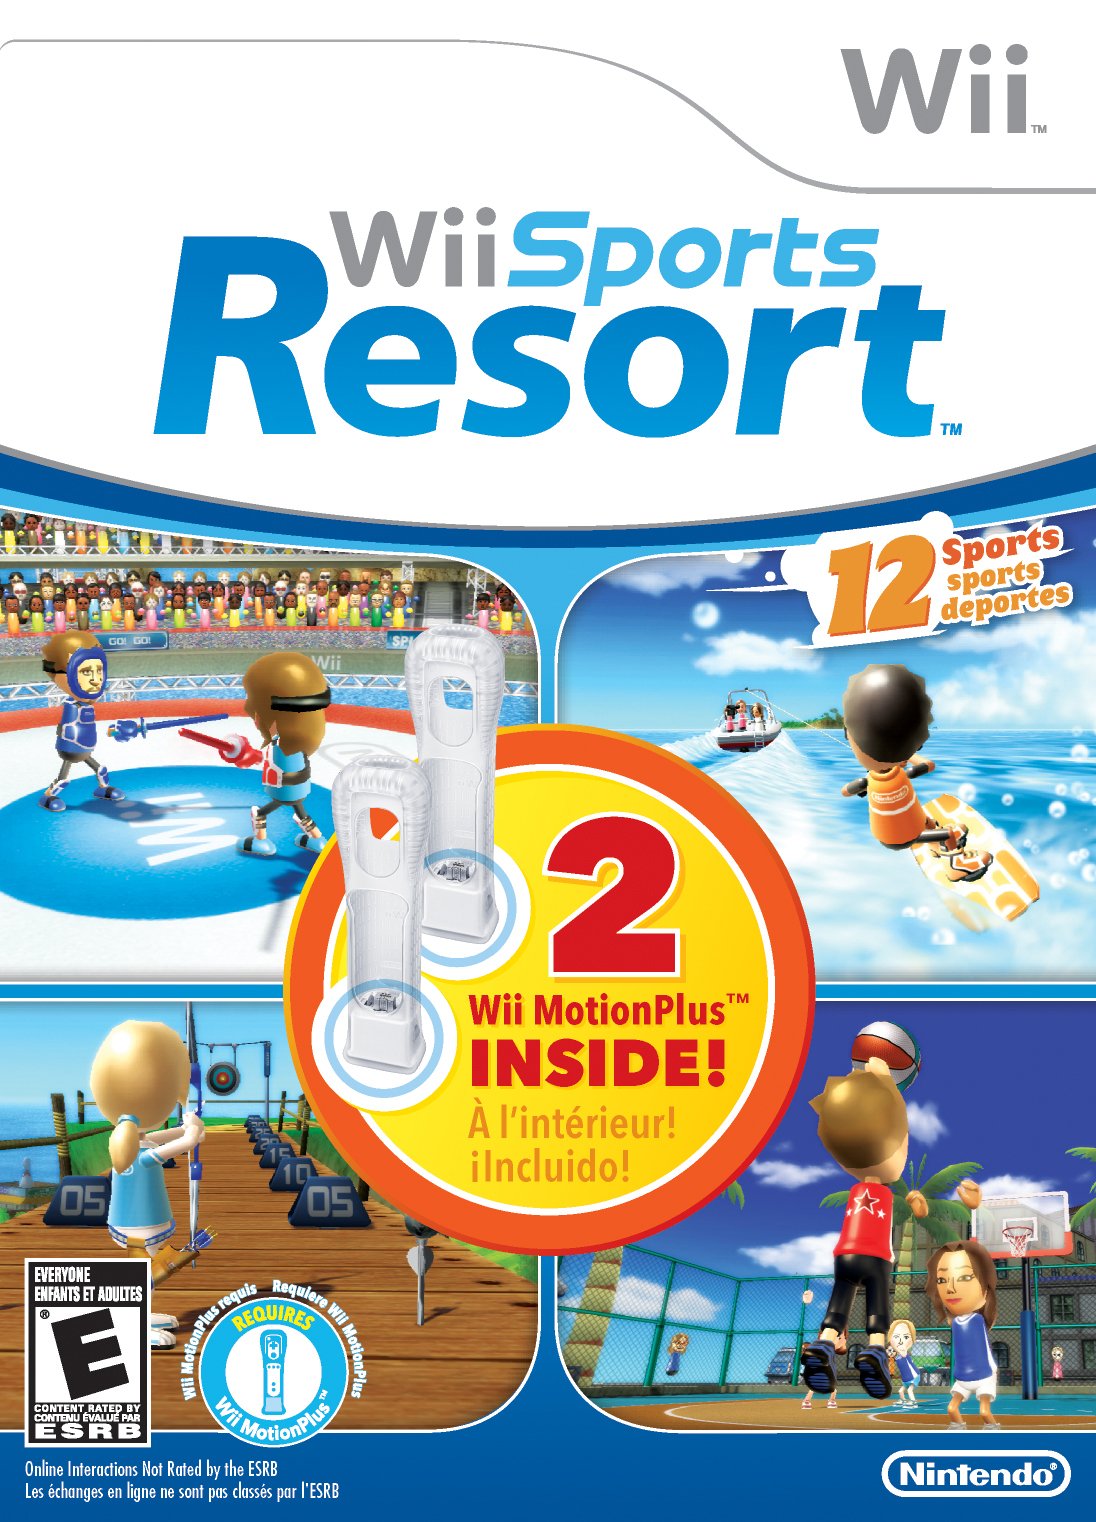 Limited-Edition Wii Sports Resort Bundle with Two Wii MotionPlus.